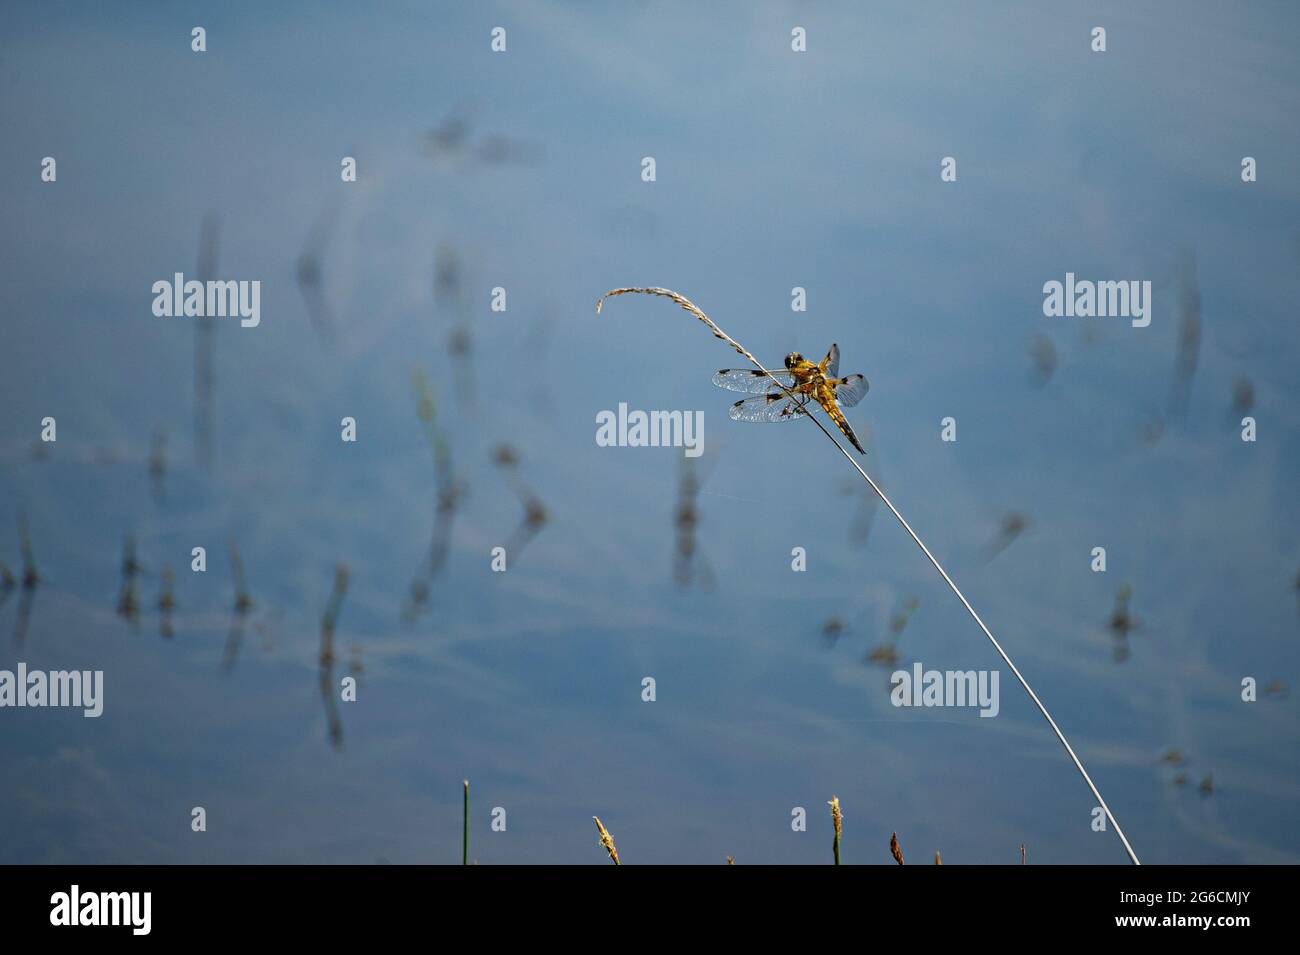 A dragonfly on a grass stem. A dragonfly at rest on a blade of grass. Photo taken on the edge of the Lieschbach pond in the Vosges in France. Stock Photo